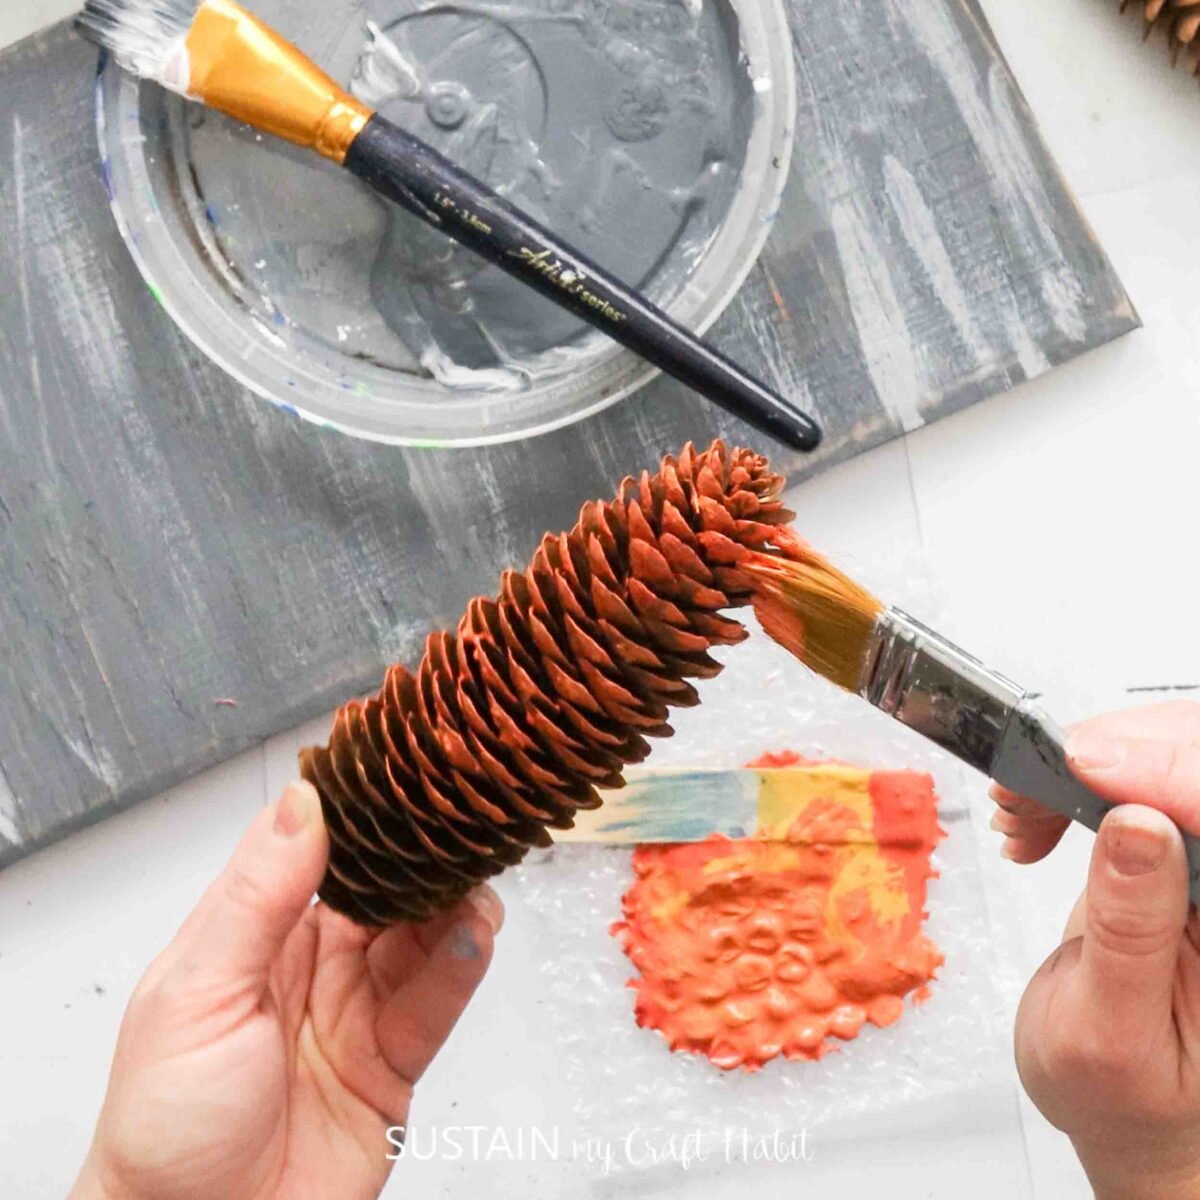 Painting a pinecone with orange paint.